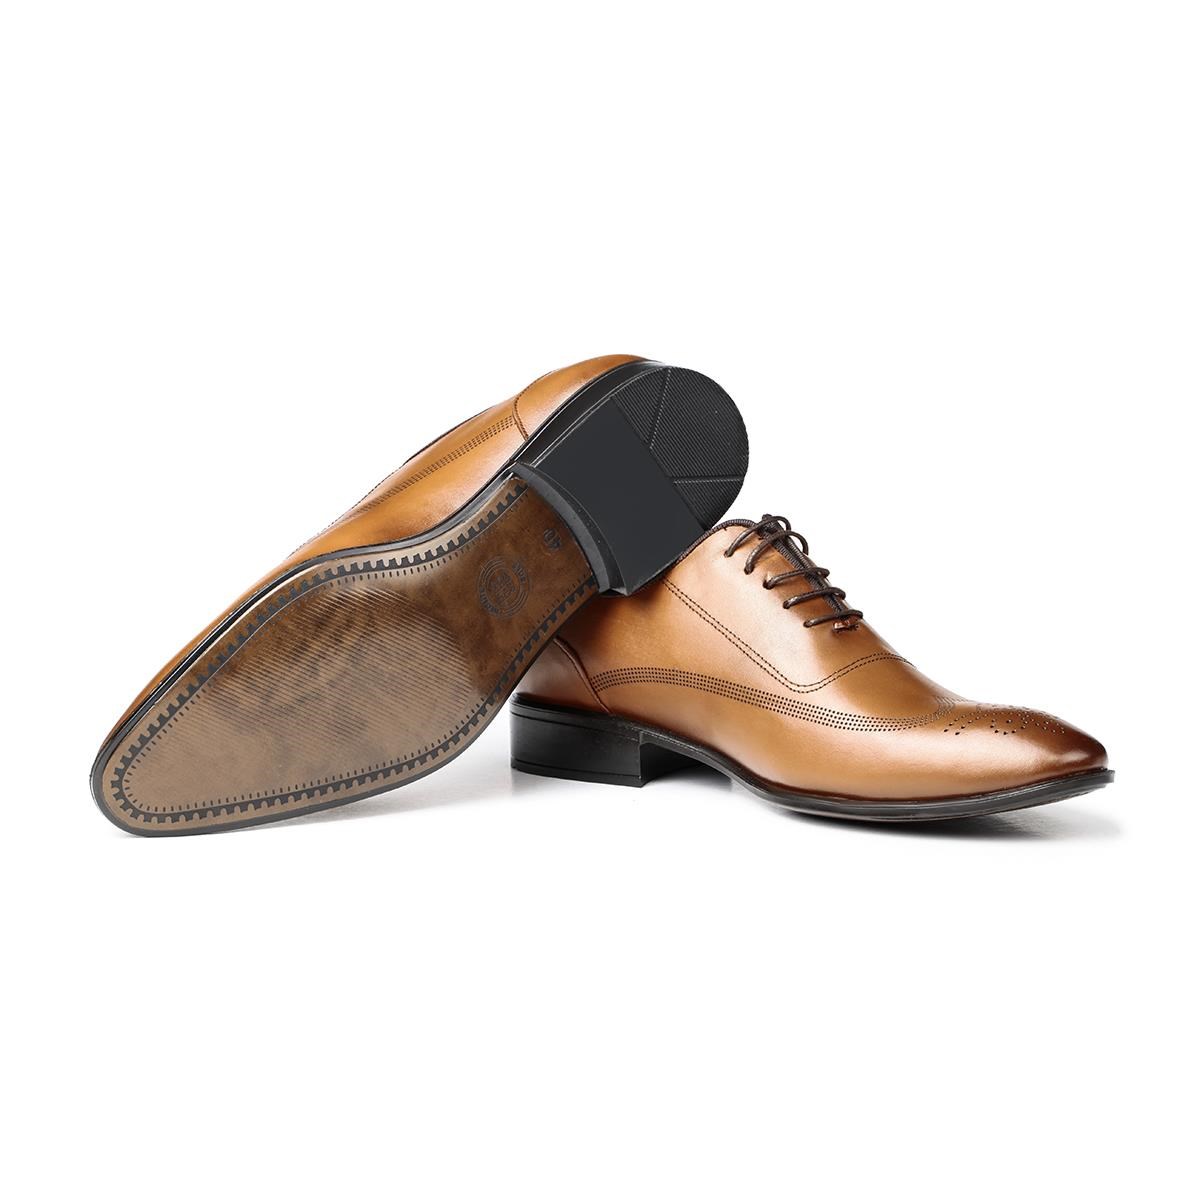 Ducavelli Stylish Genuine Leather Men's Classic Shoes